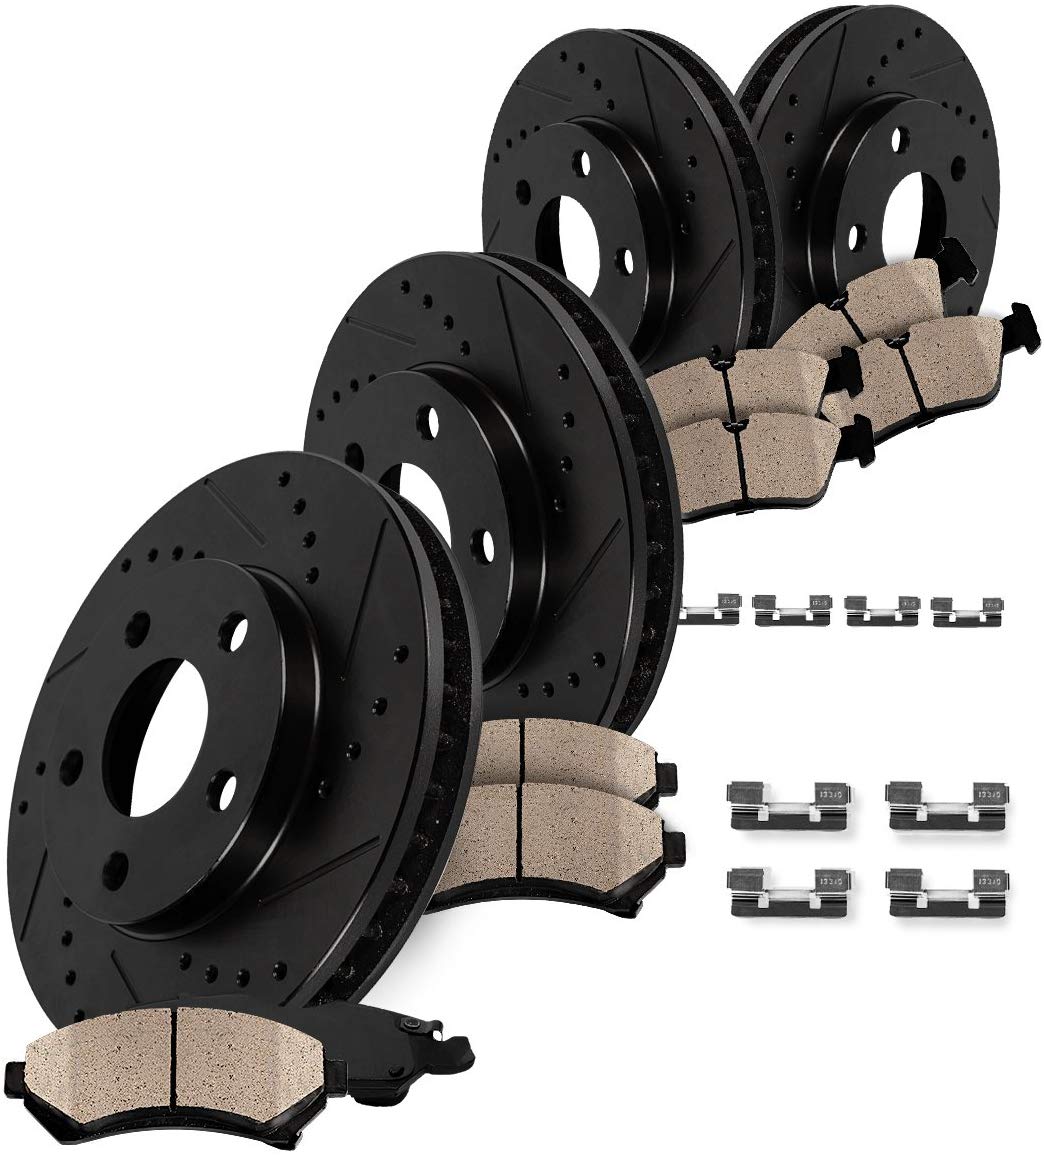 CRK13622 FRONT 299mm + REAR 280mm Black Drilled/Slotted 5 Lug [4] Rotors + [8] Quiet Low Dust Ceramic Brake Pads + Clips